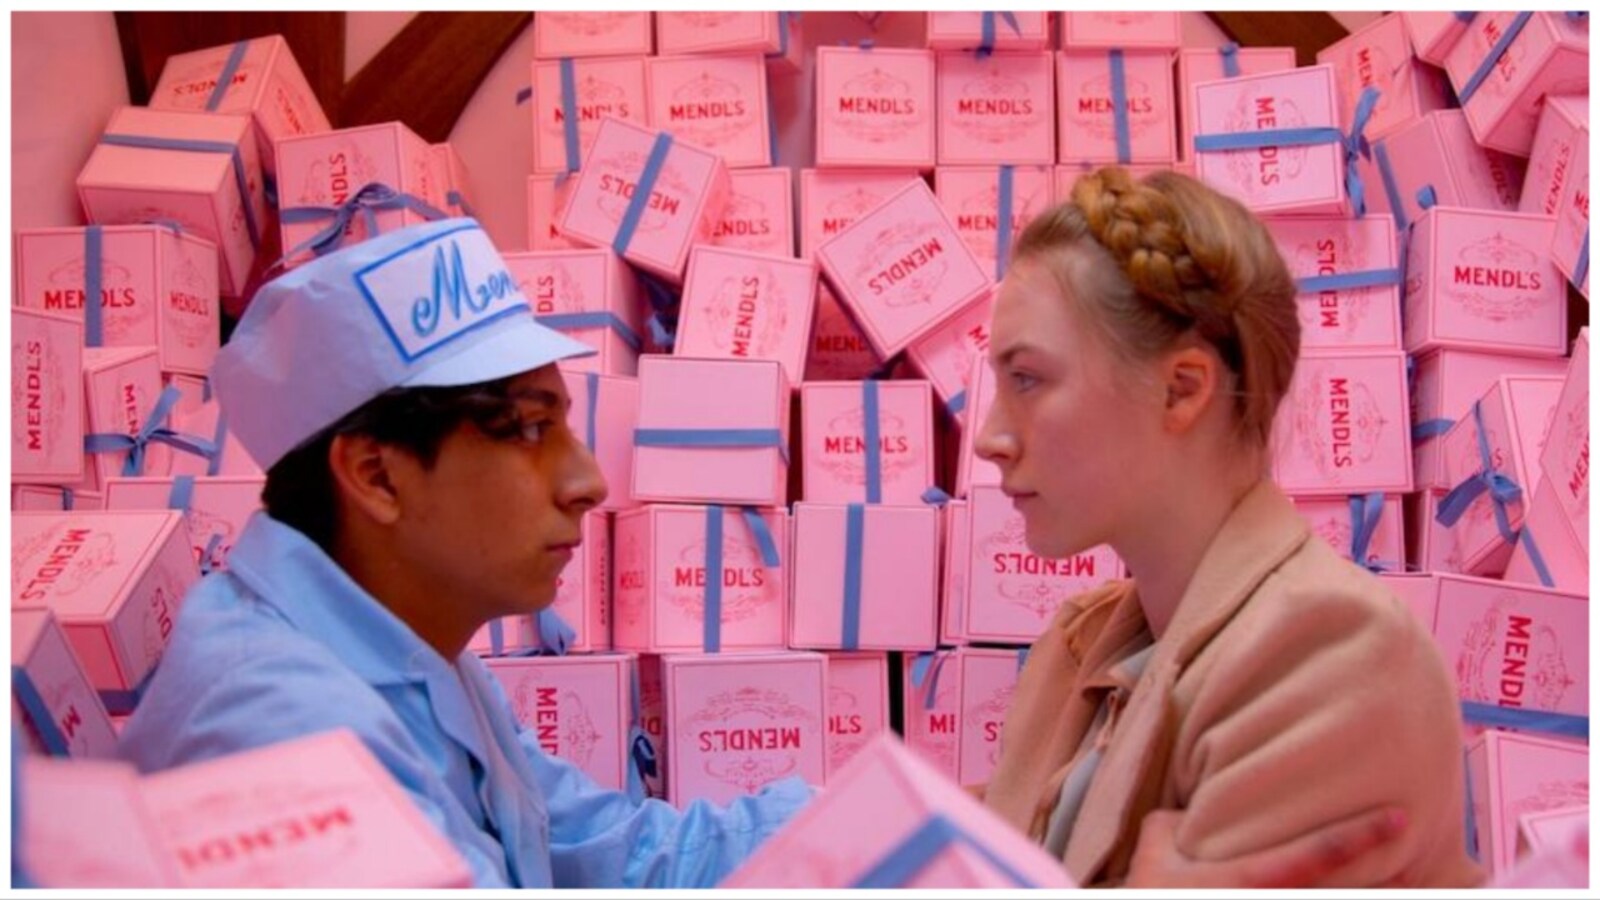 Wes Anderson AI Art Style - Quirky Symmetry and Pastel Palettes